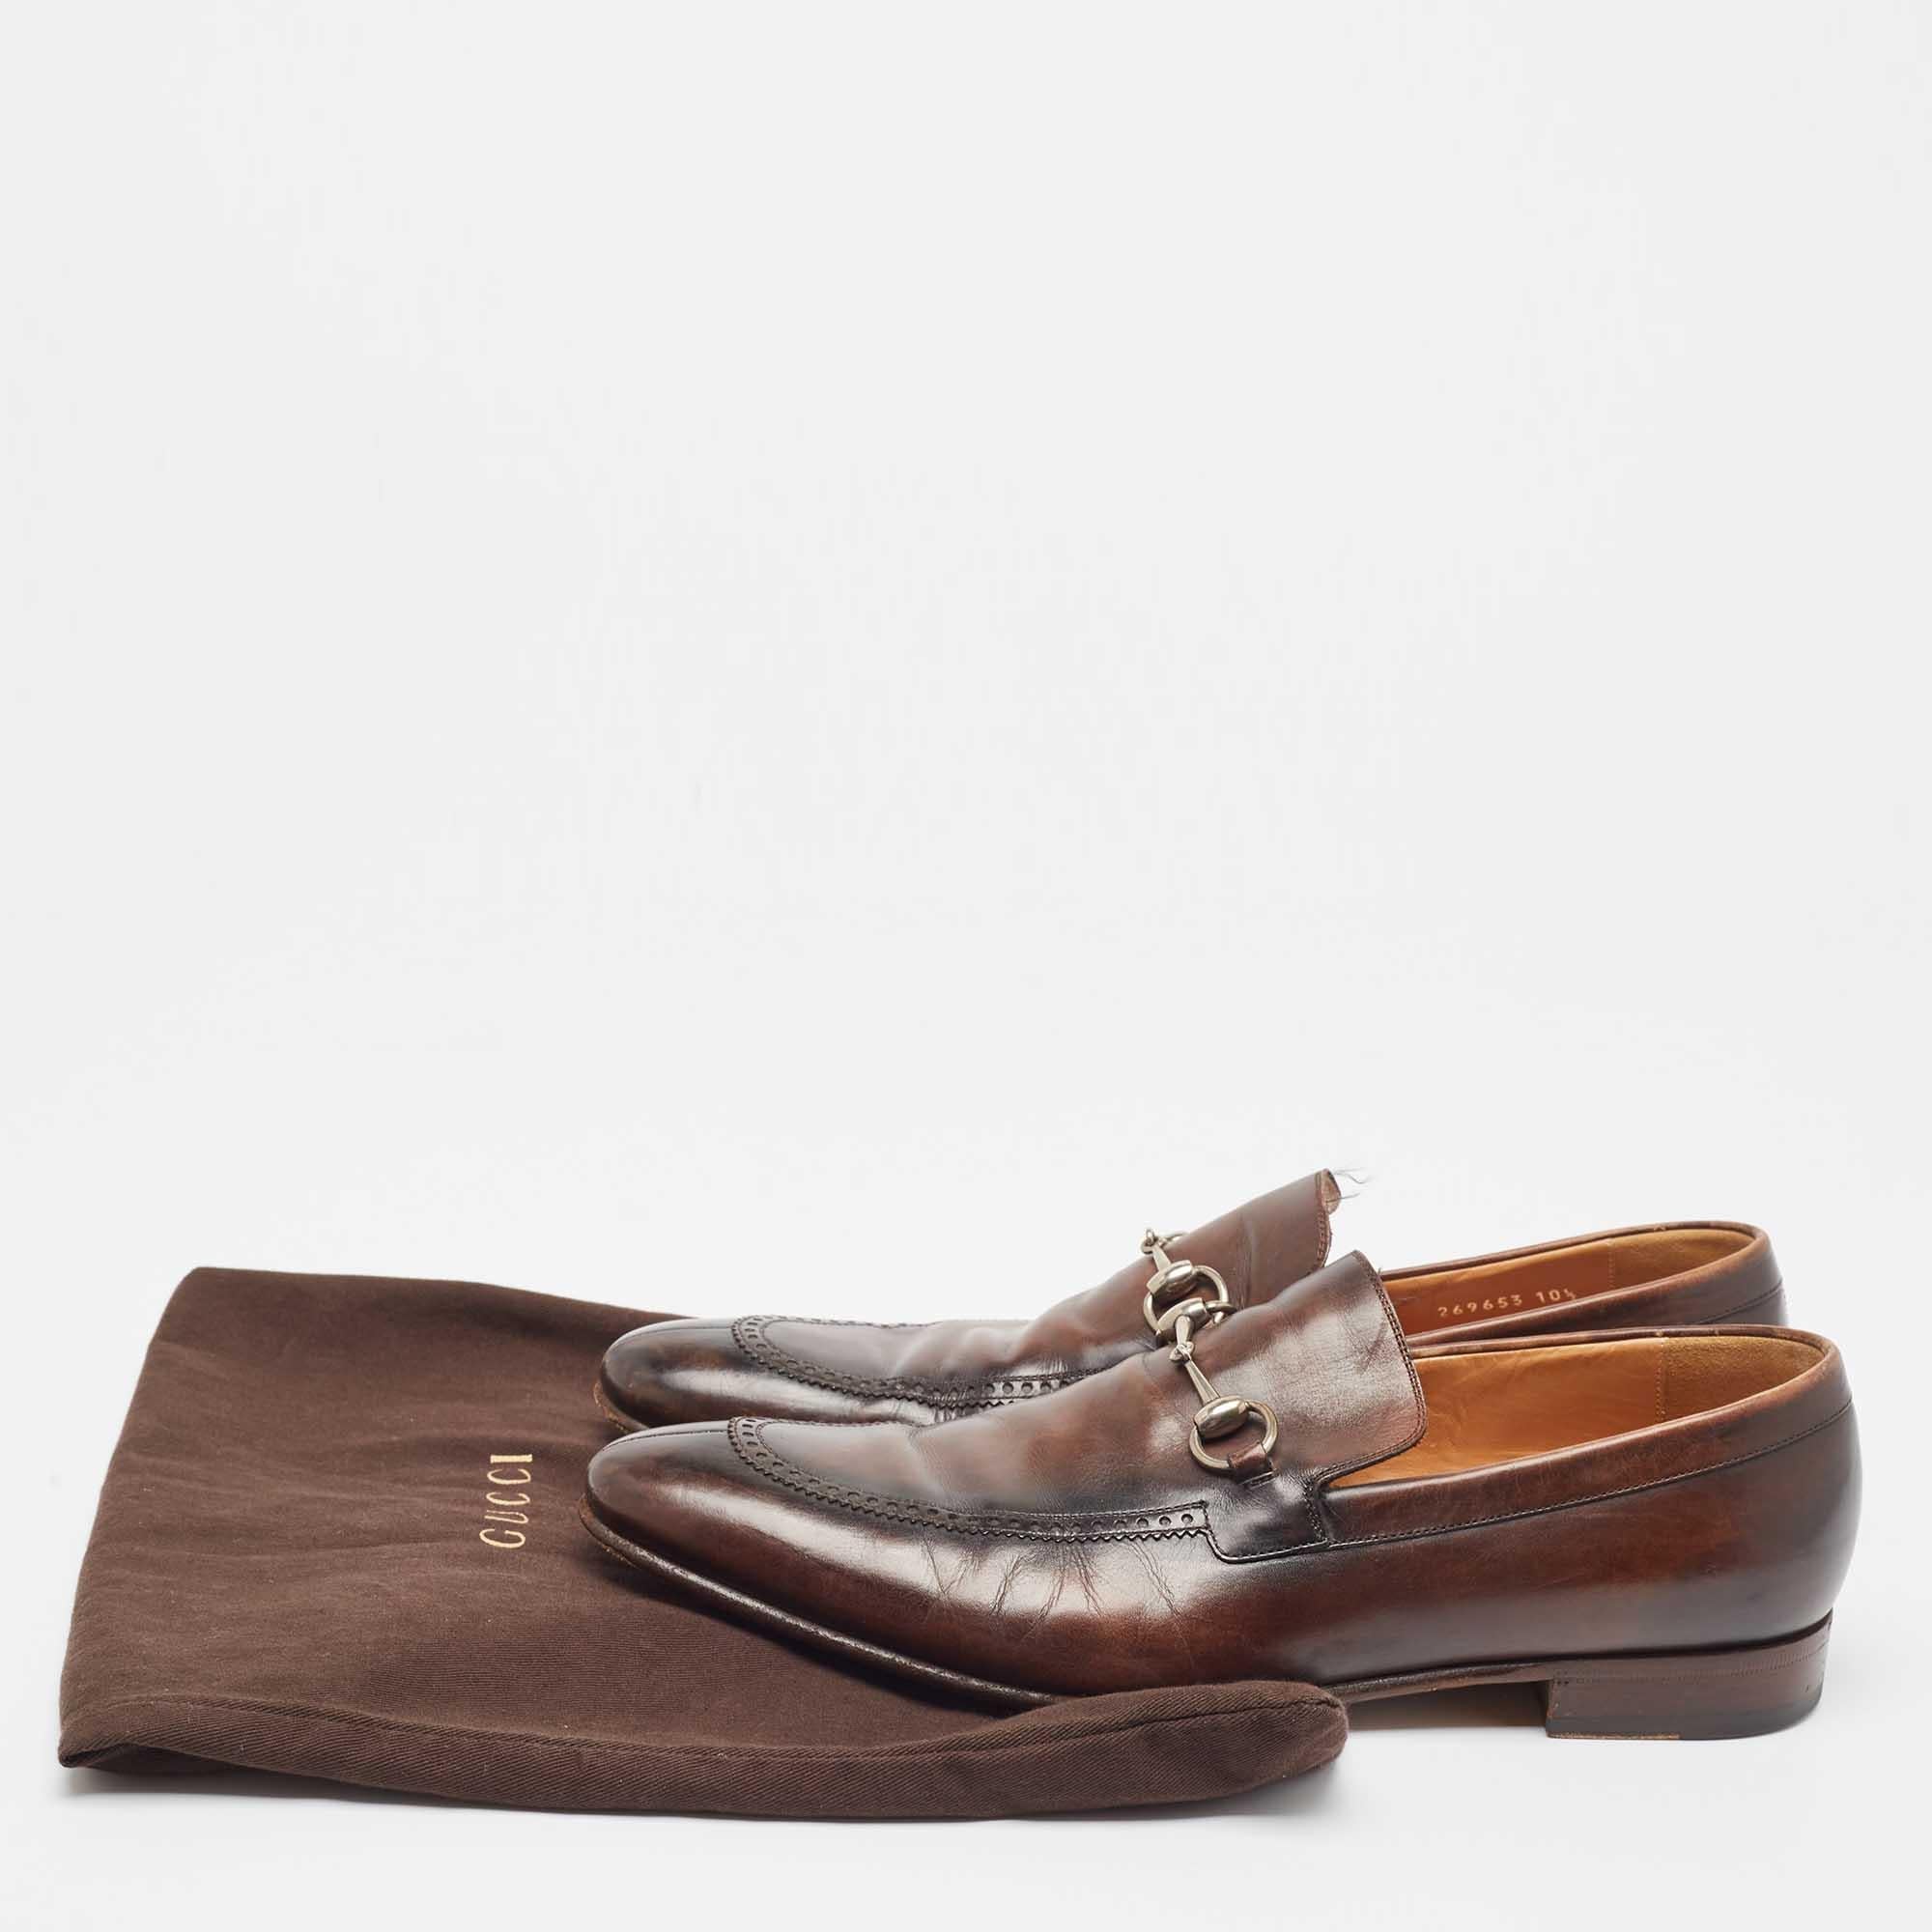 Gucci Brown Leather Horsebit Loafers Size 44.5 For Sale 4